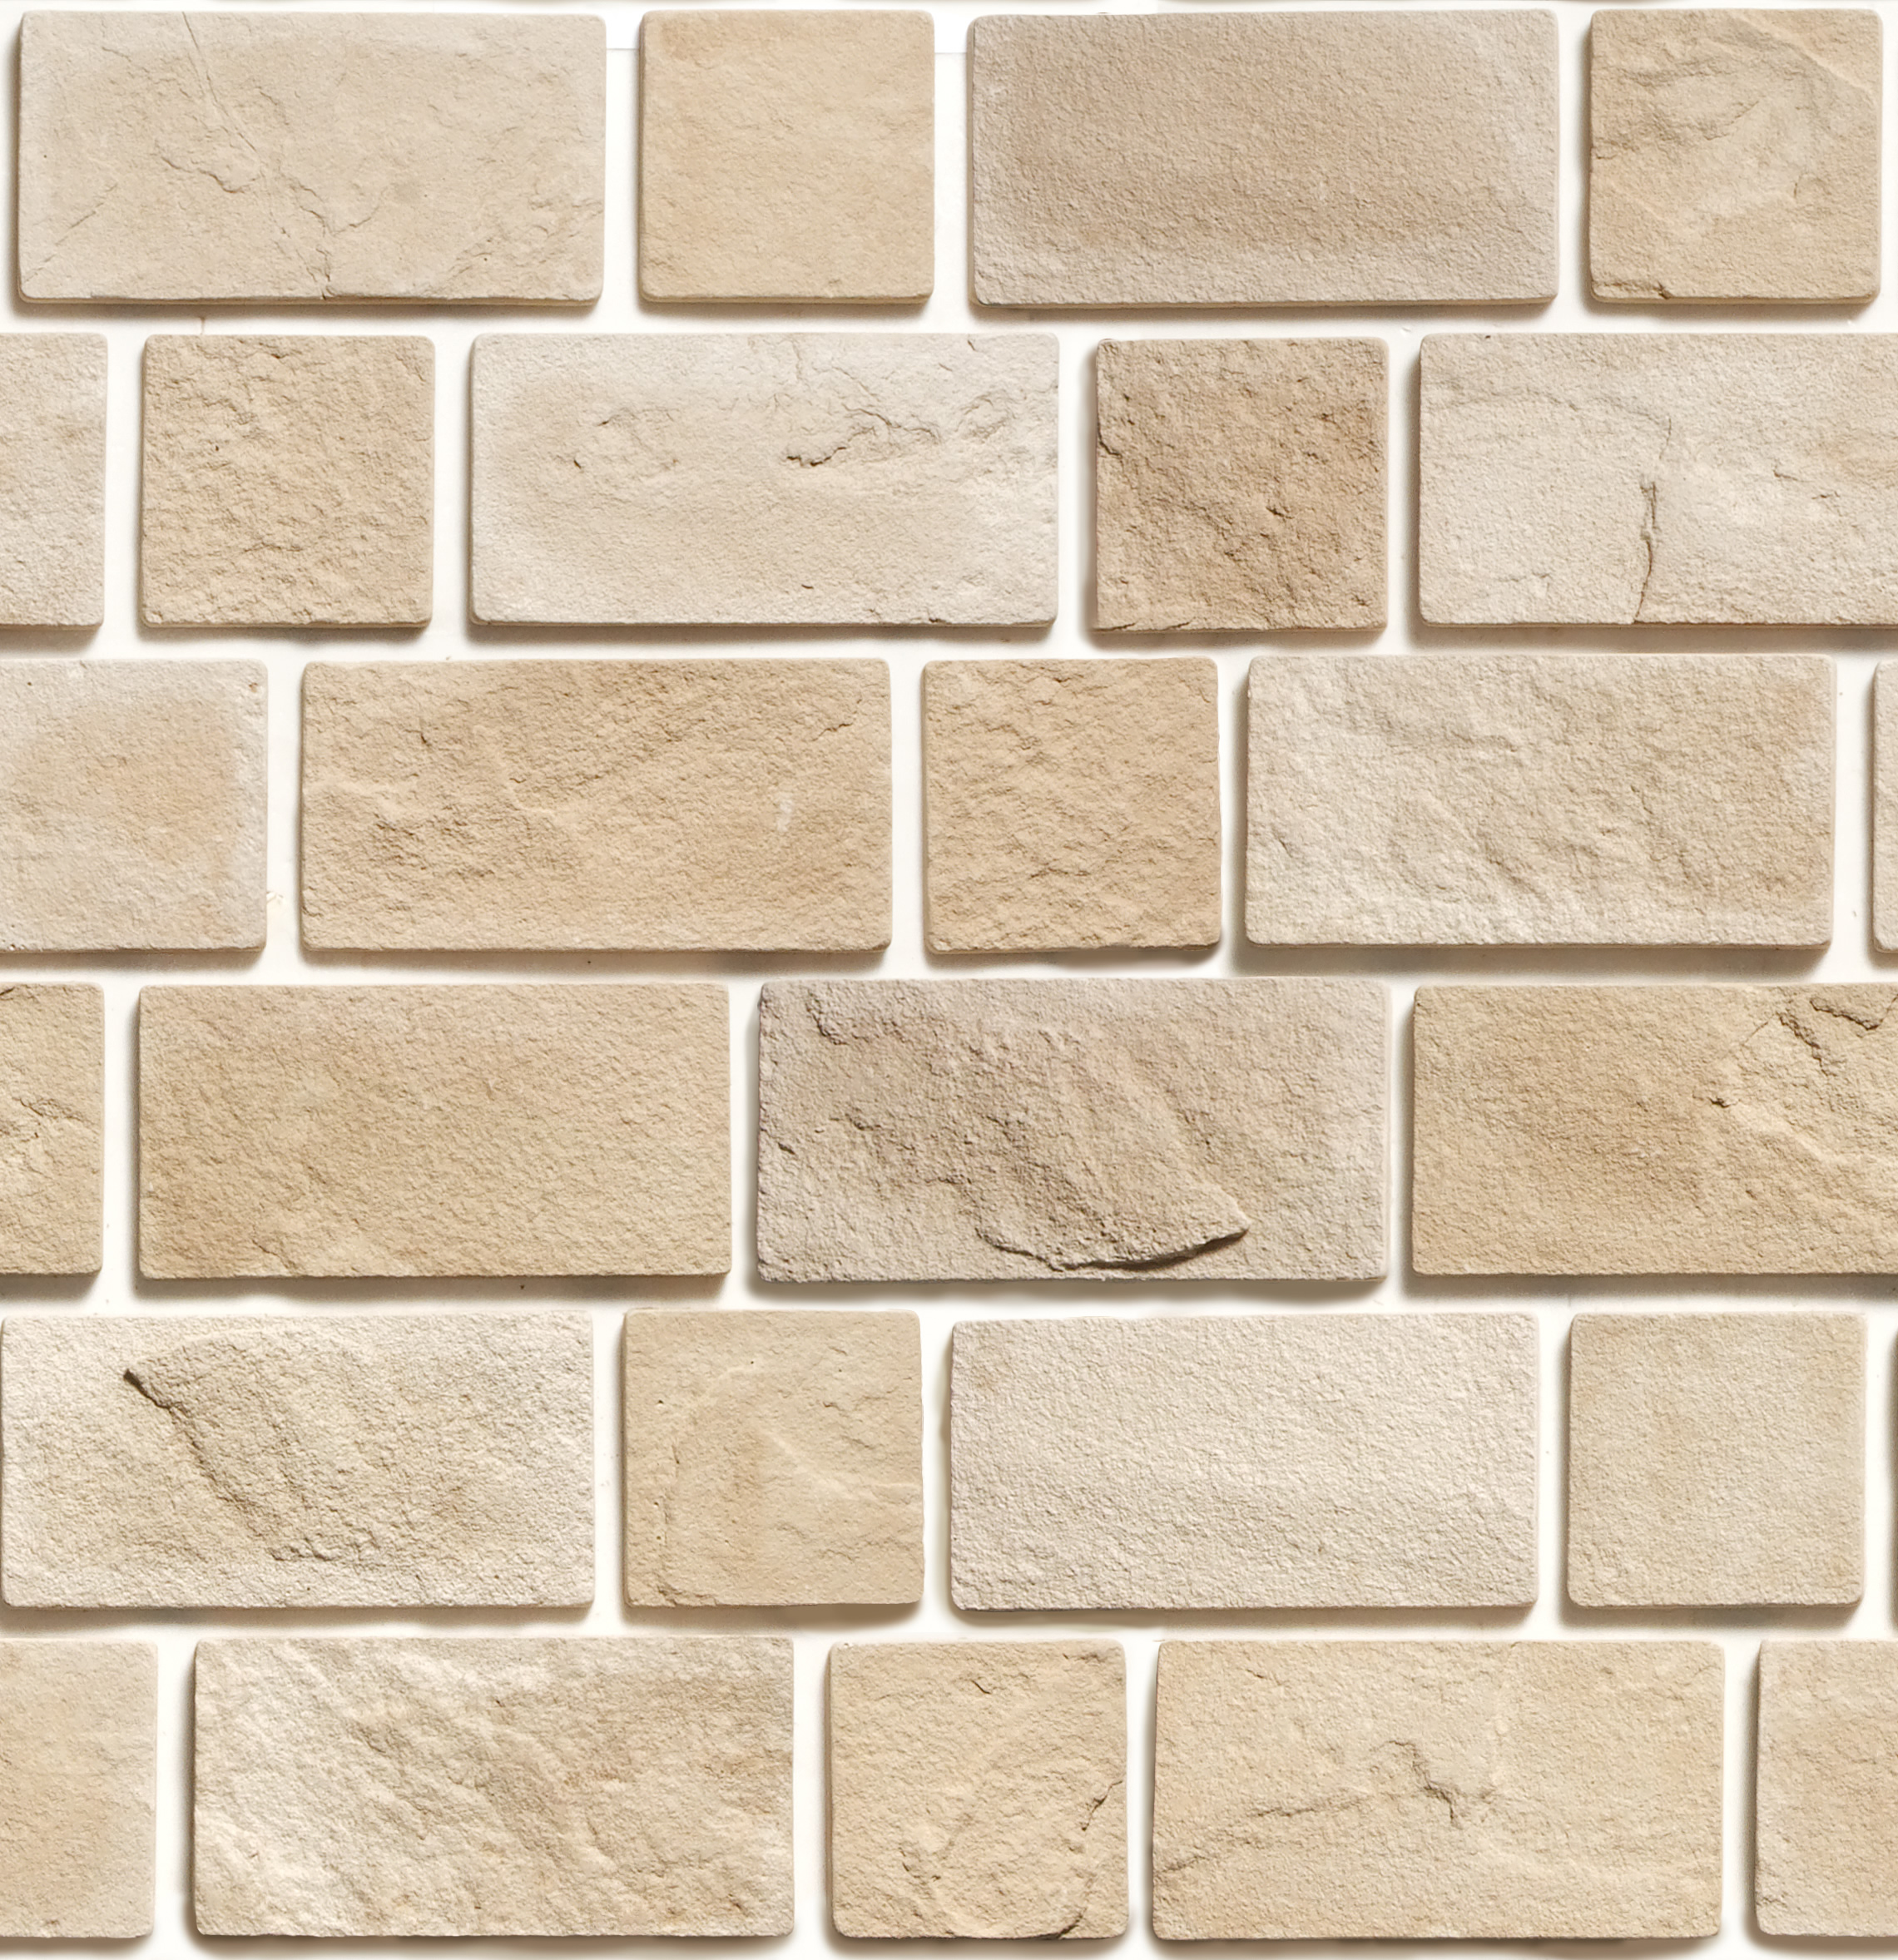 stone hewn, tile, texture, wall, download photo, stone texture